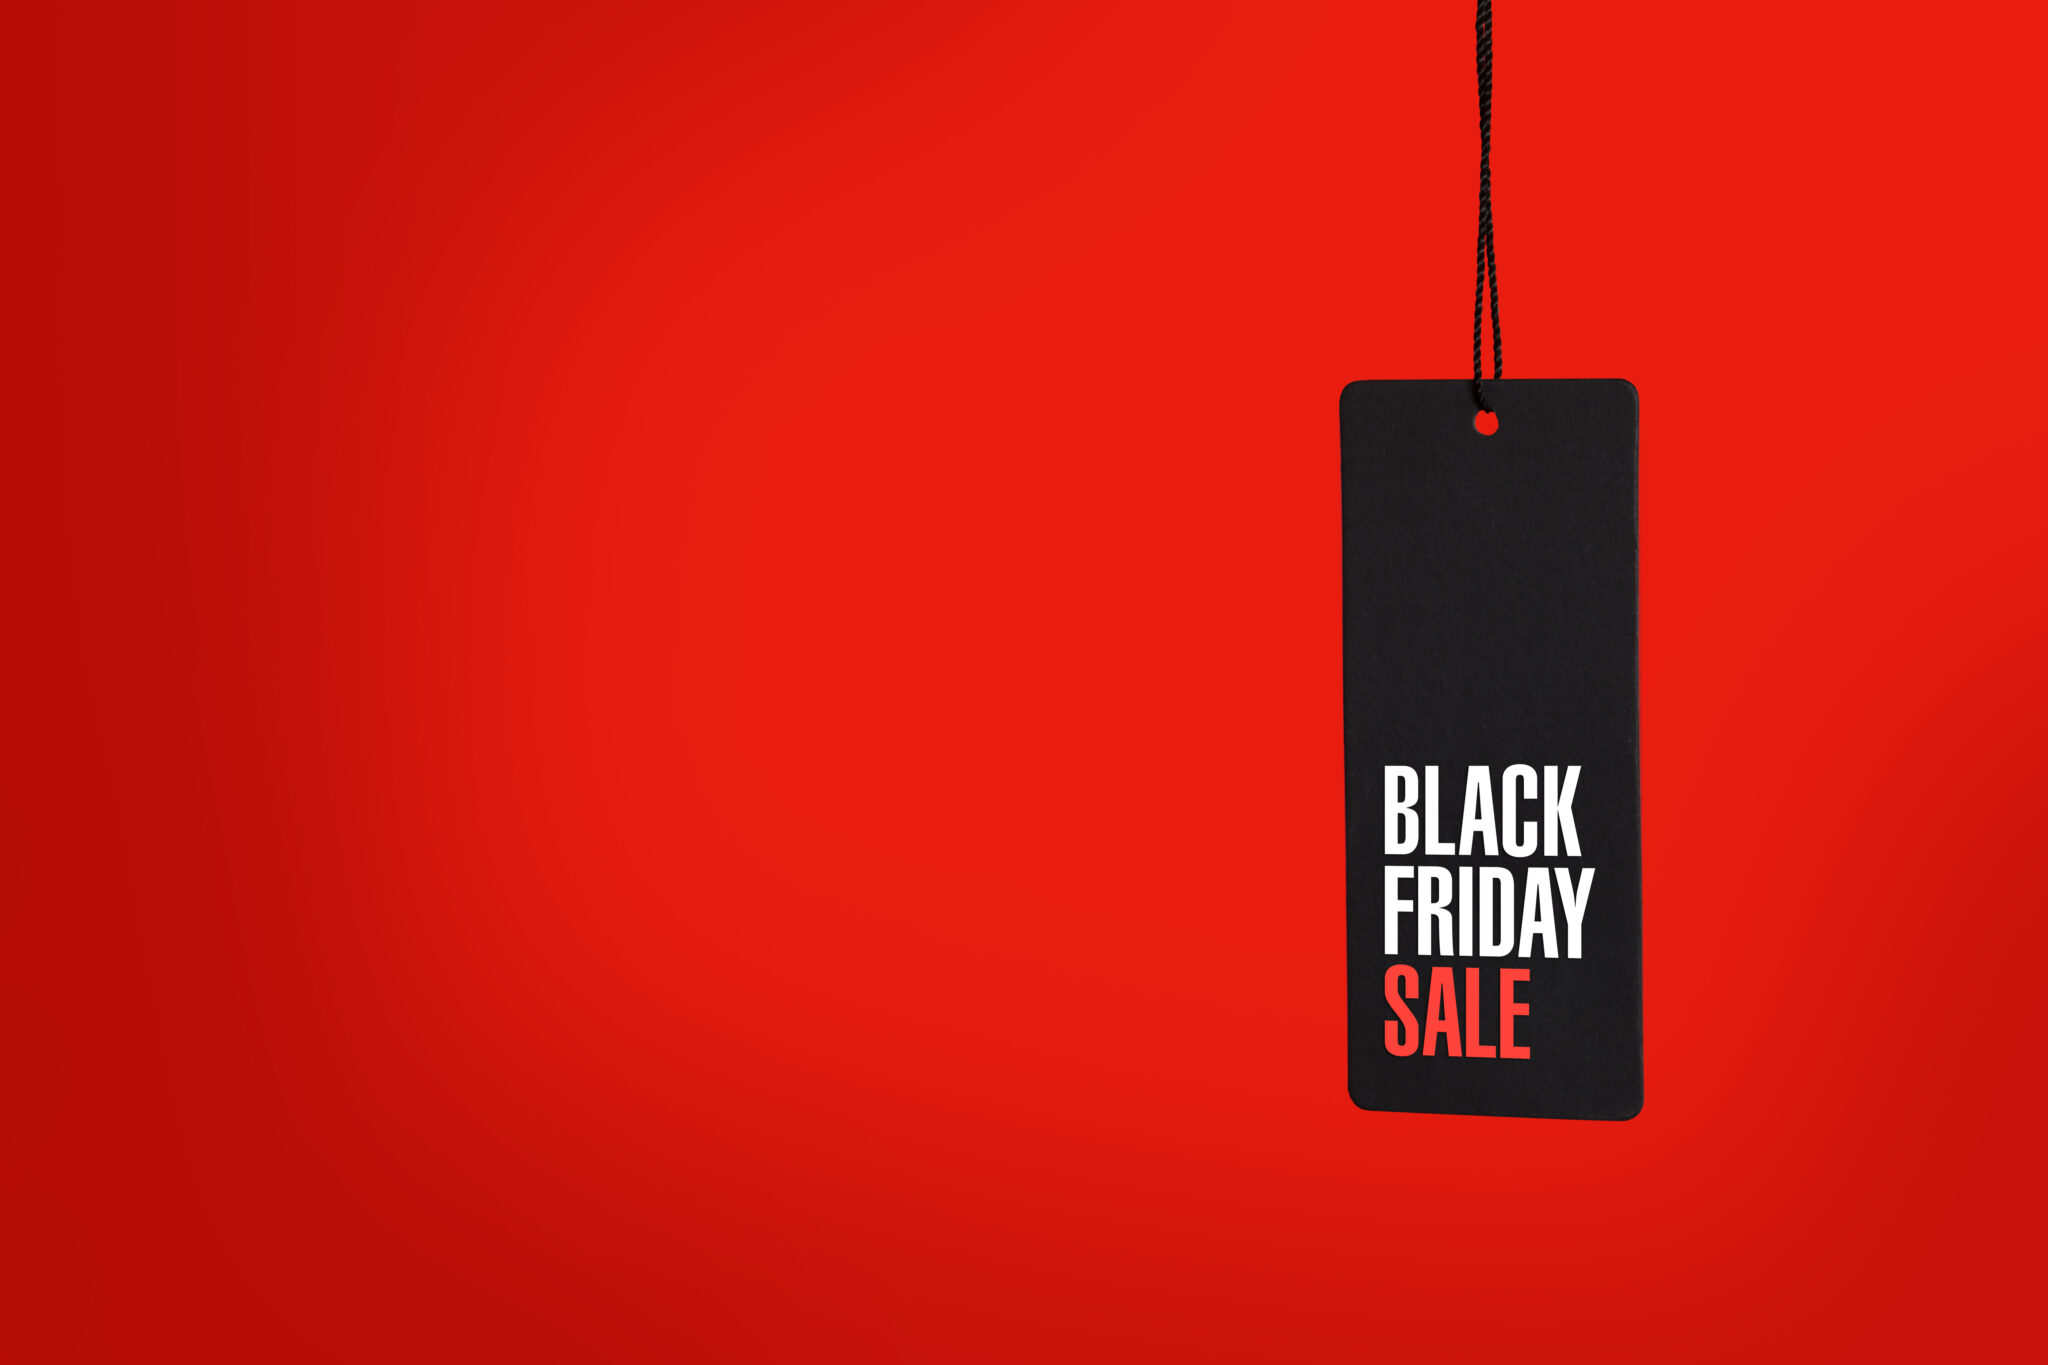 Black friday. Sale tag on red background